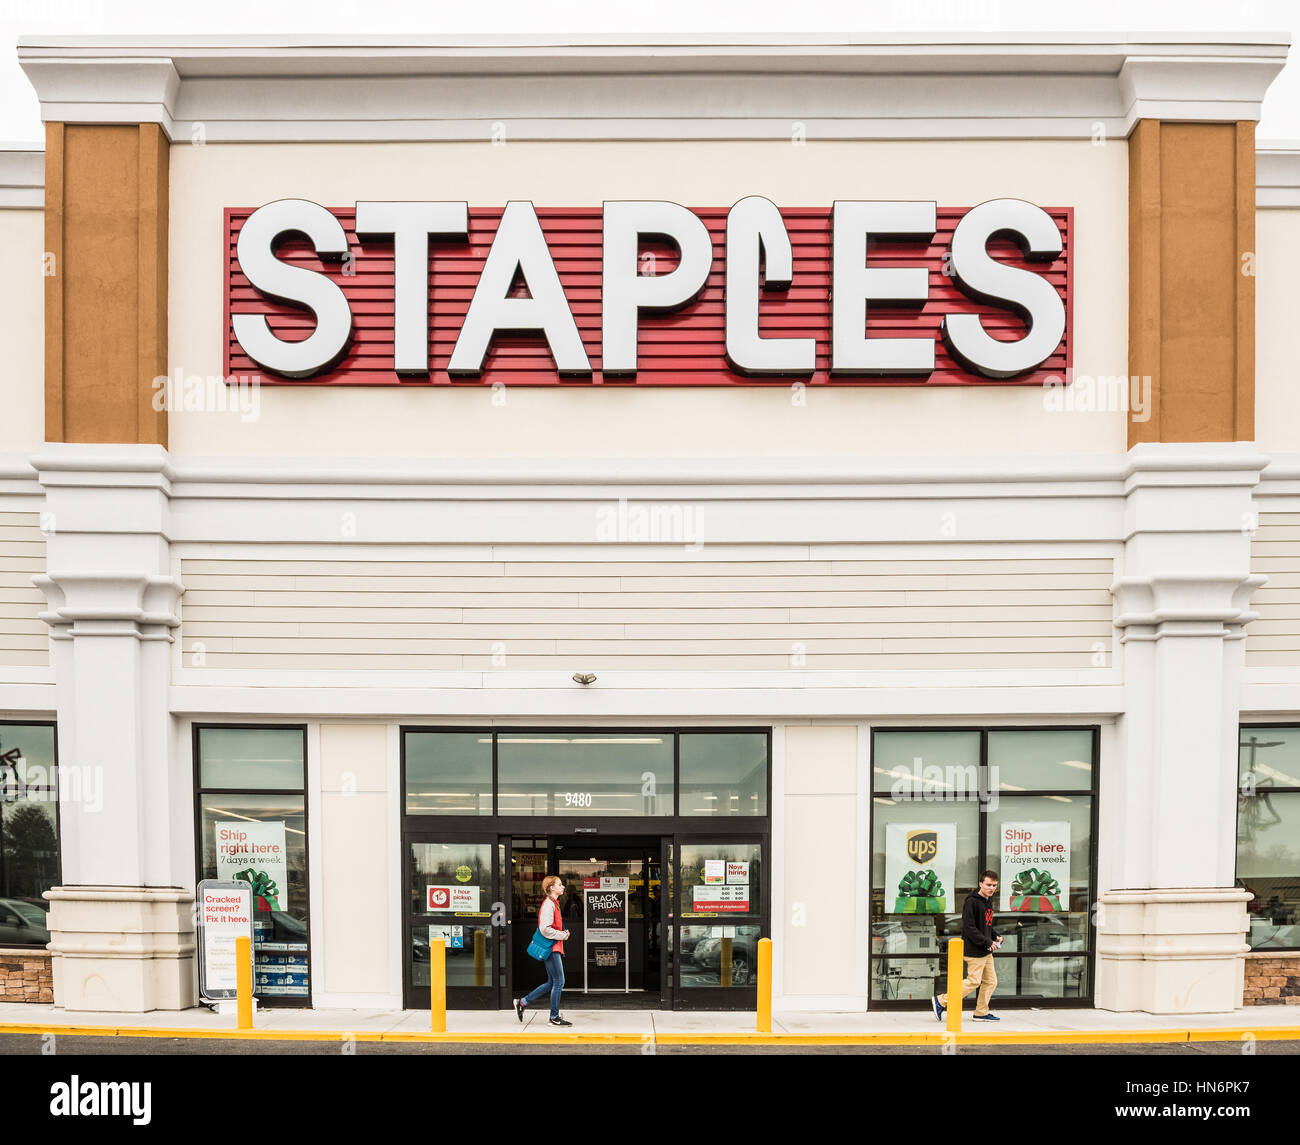 Fairfax, USA - November 25, 2016: Staples store facade with large sign and person walking by entrance Stock Photo